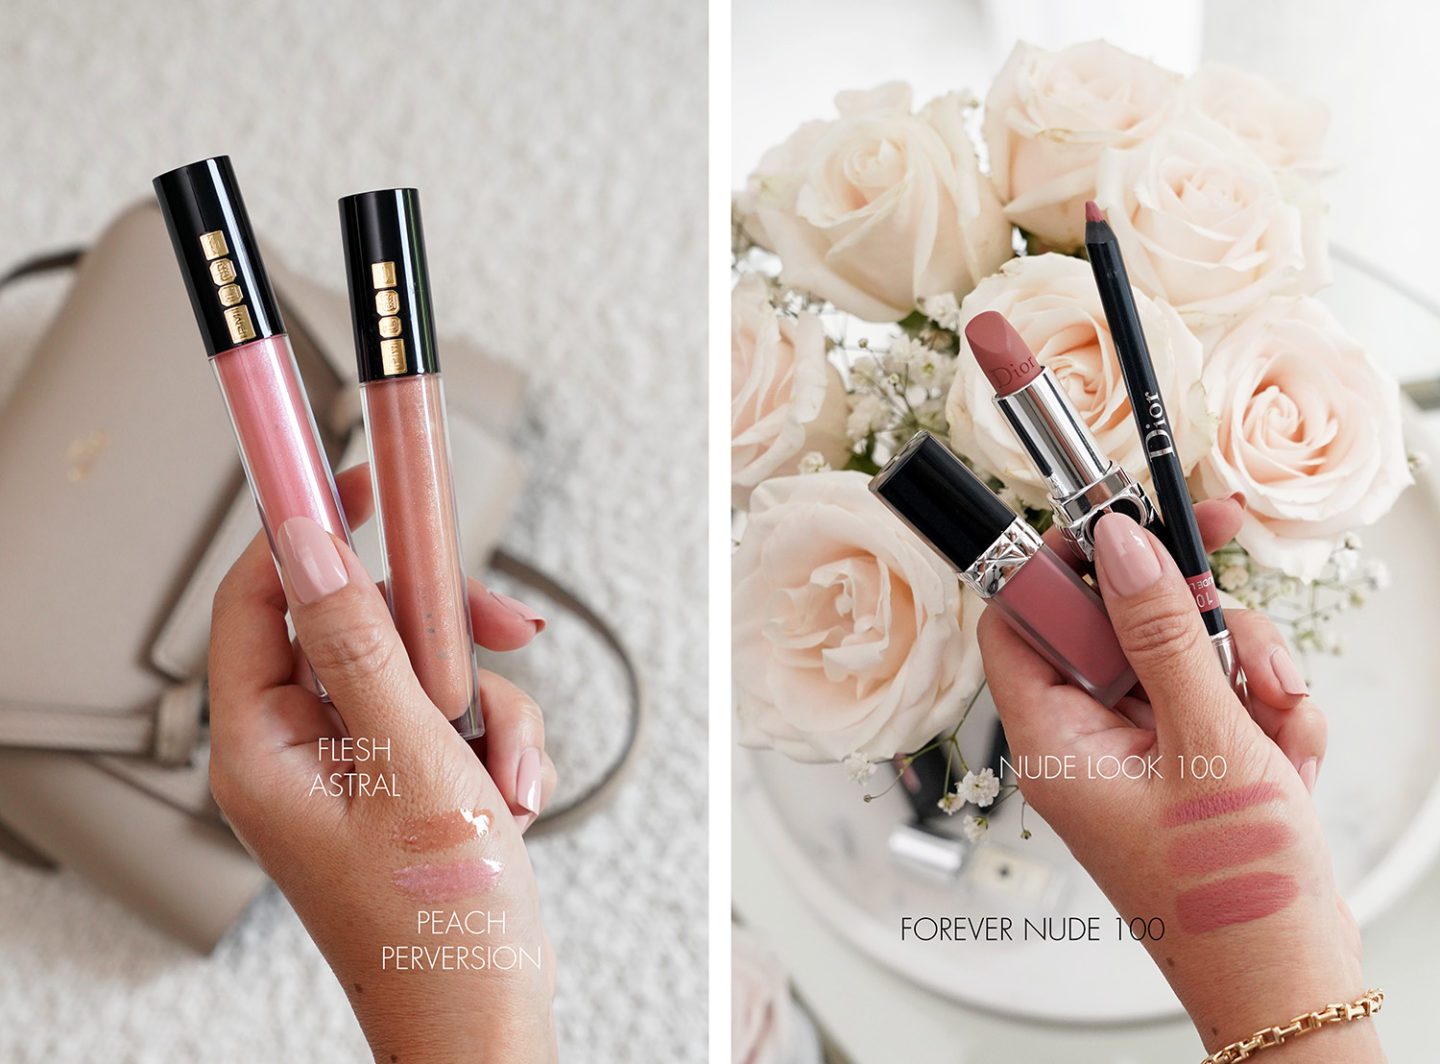 Pat McGrath LUST Gloss and Dior Nude Look Lipstick